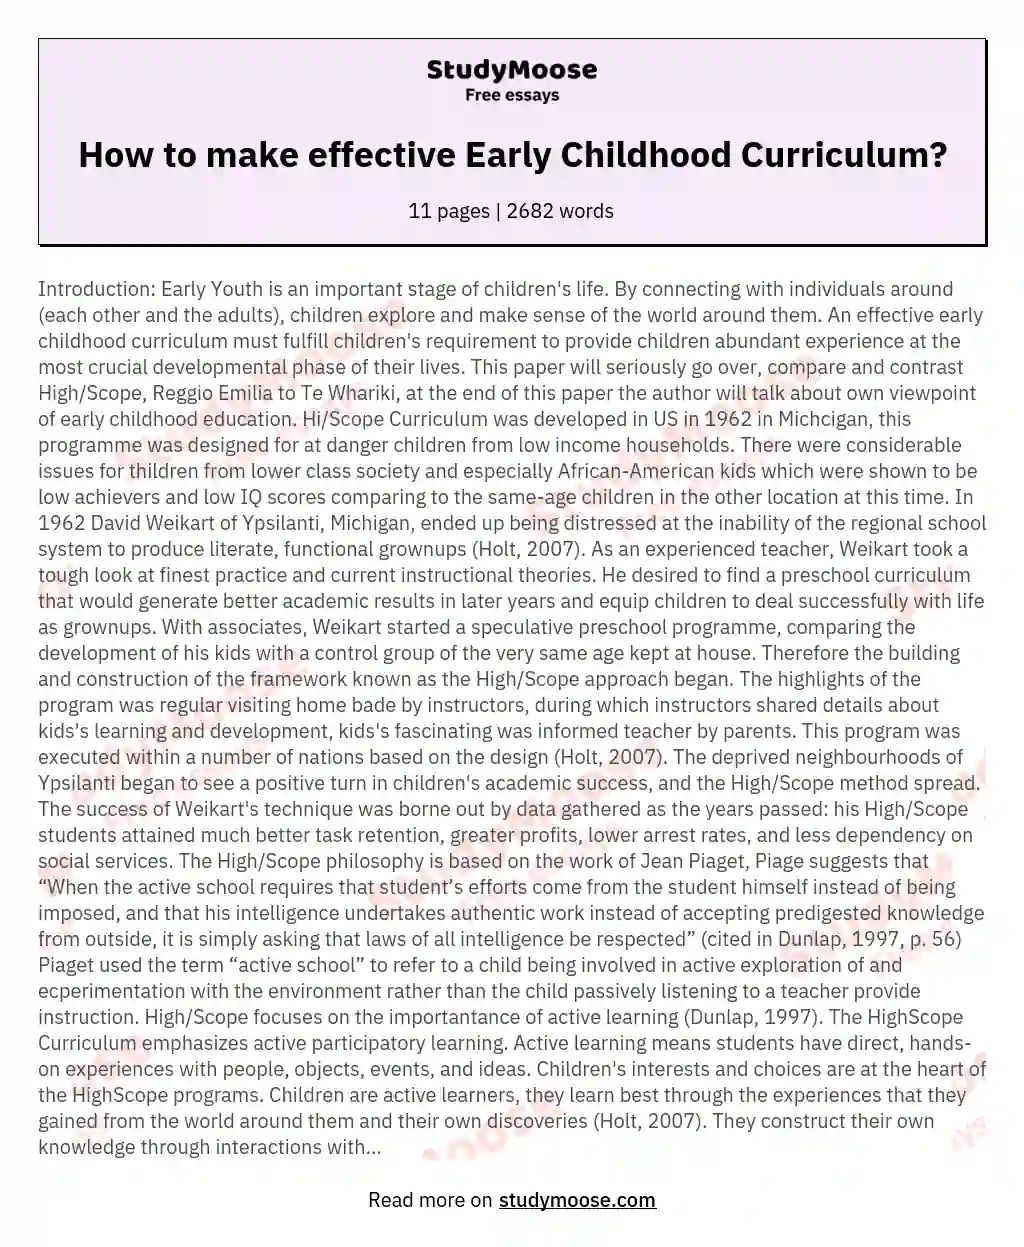 How to make effective Early Childhood Curriculum?